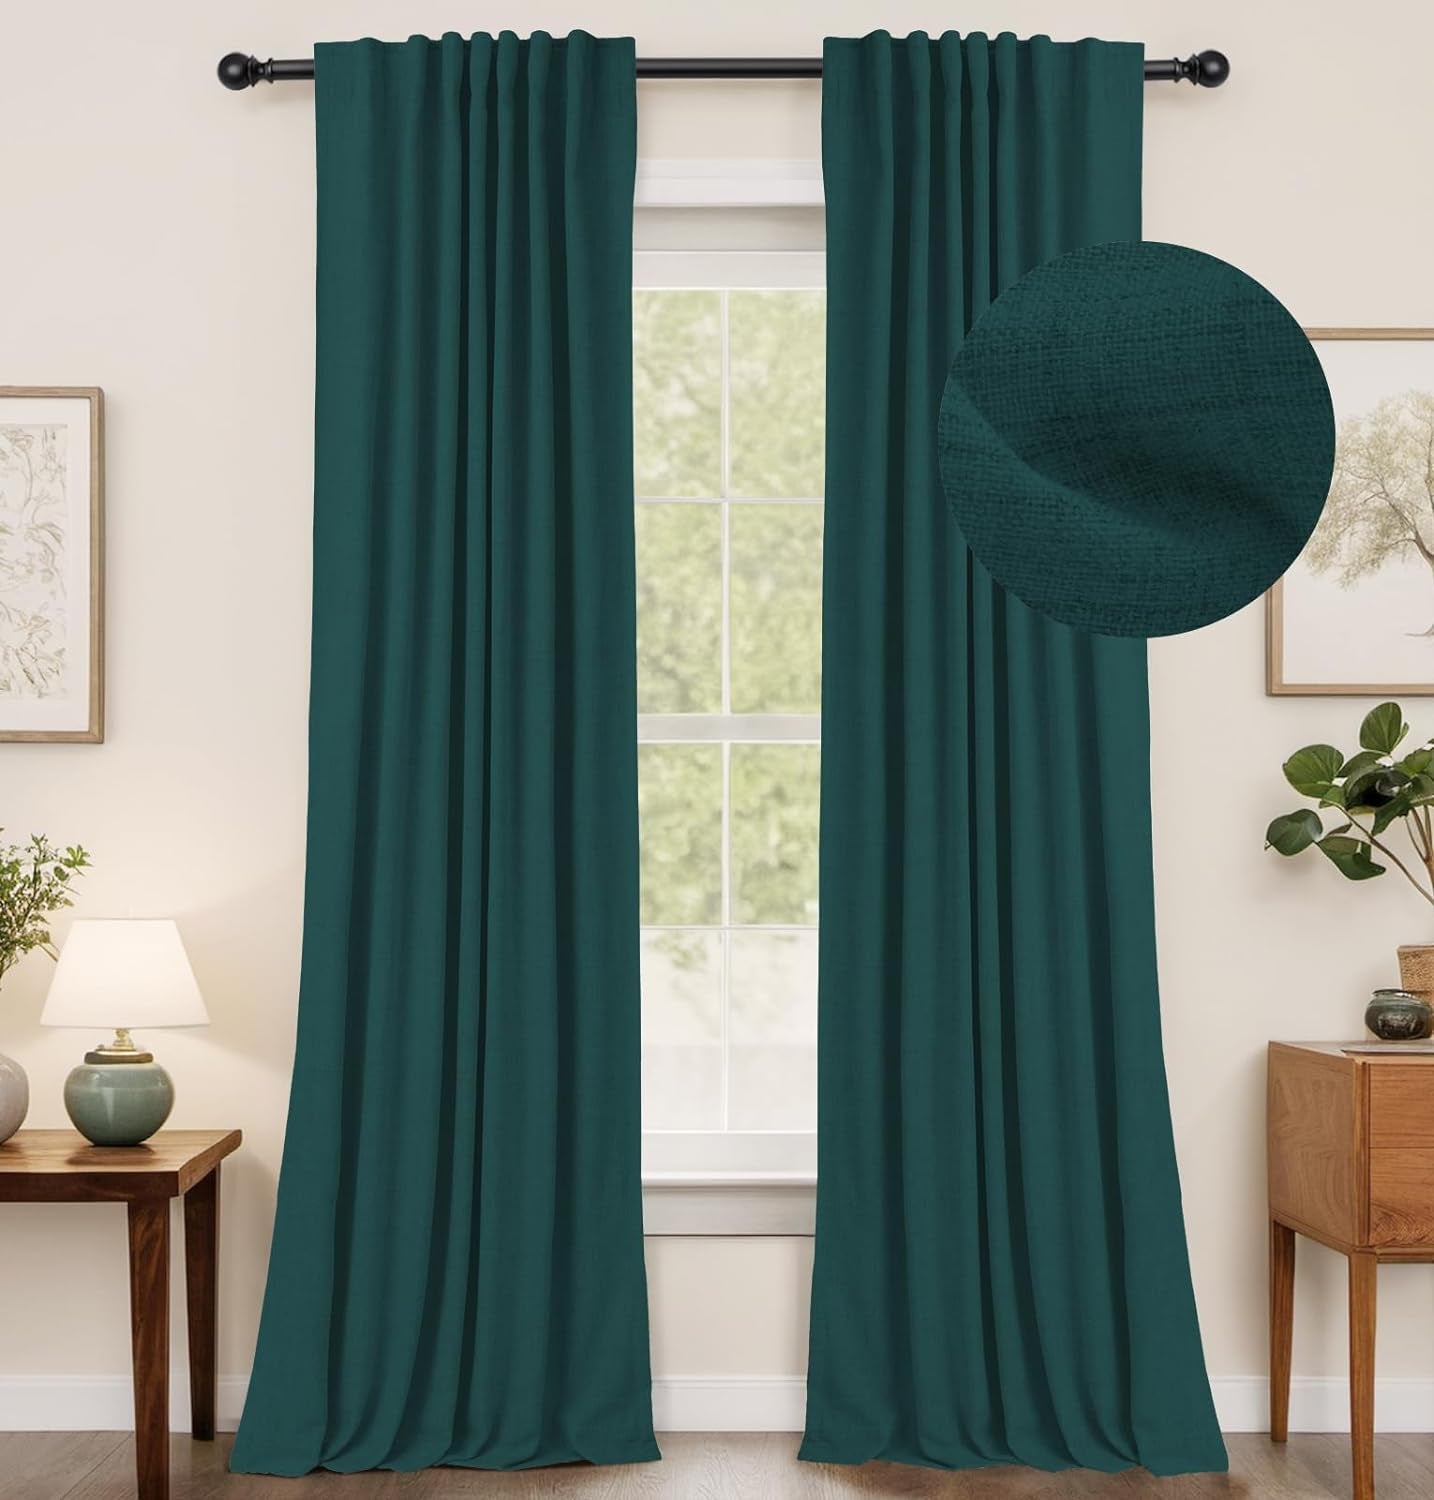 INOVADAY 100% Blackout Curtains 96 Inches Long 2 Panels Set, Thermal Insulated Linen Blackout Curtains for Bedroom, Back Tab/Rod Pocket Curtains & Drapes for Living Room - Beige, W50 X L96  INOVADAY 18 Hunter Green 50''W X 108''L 